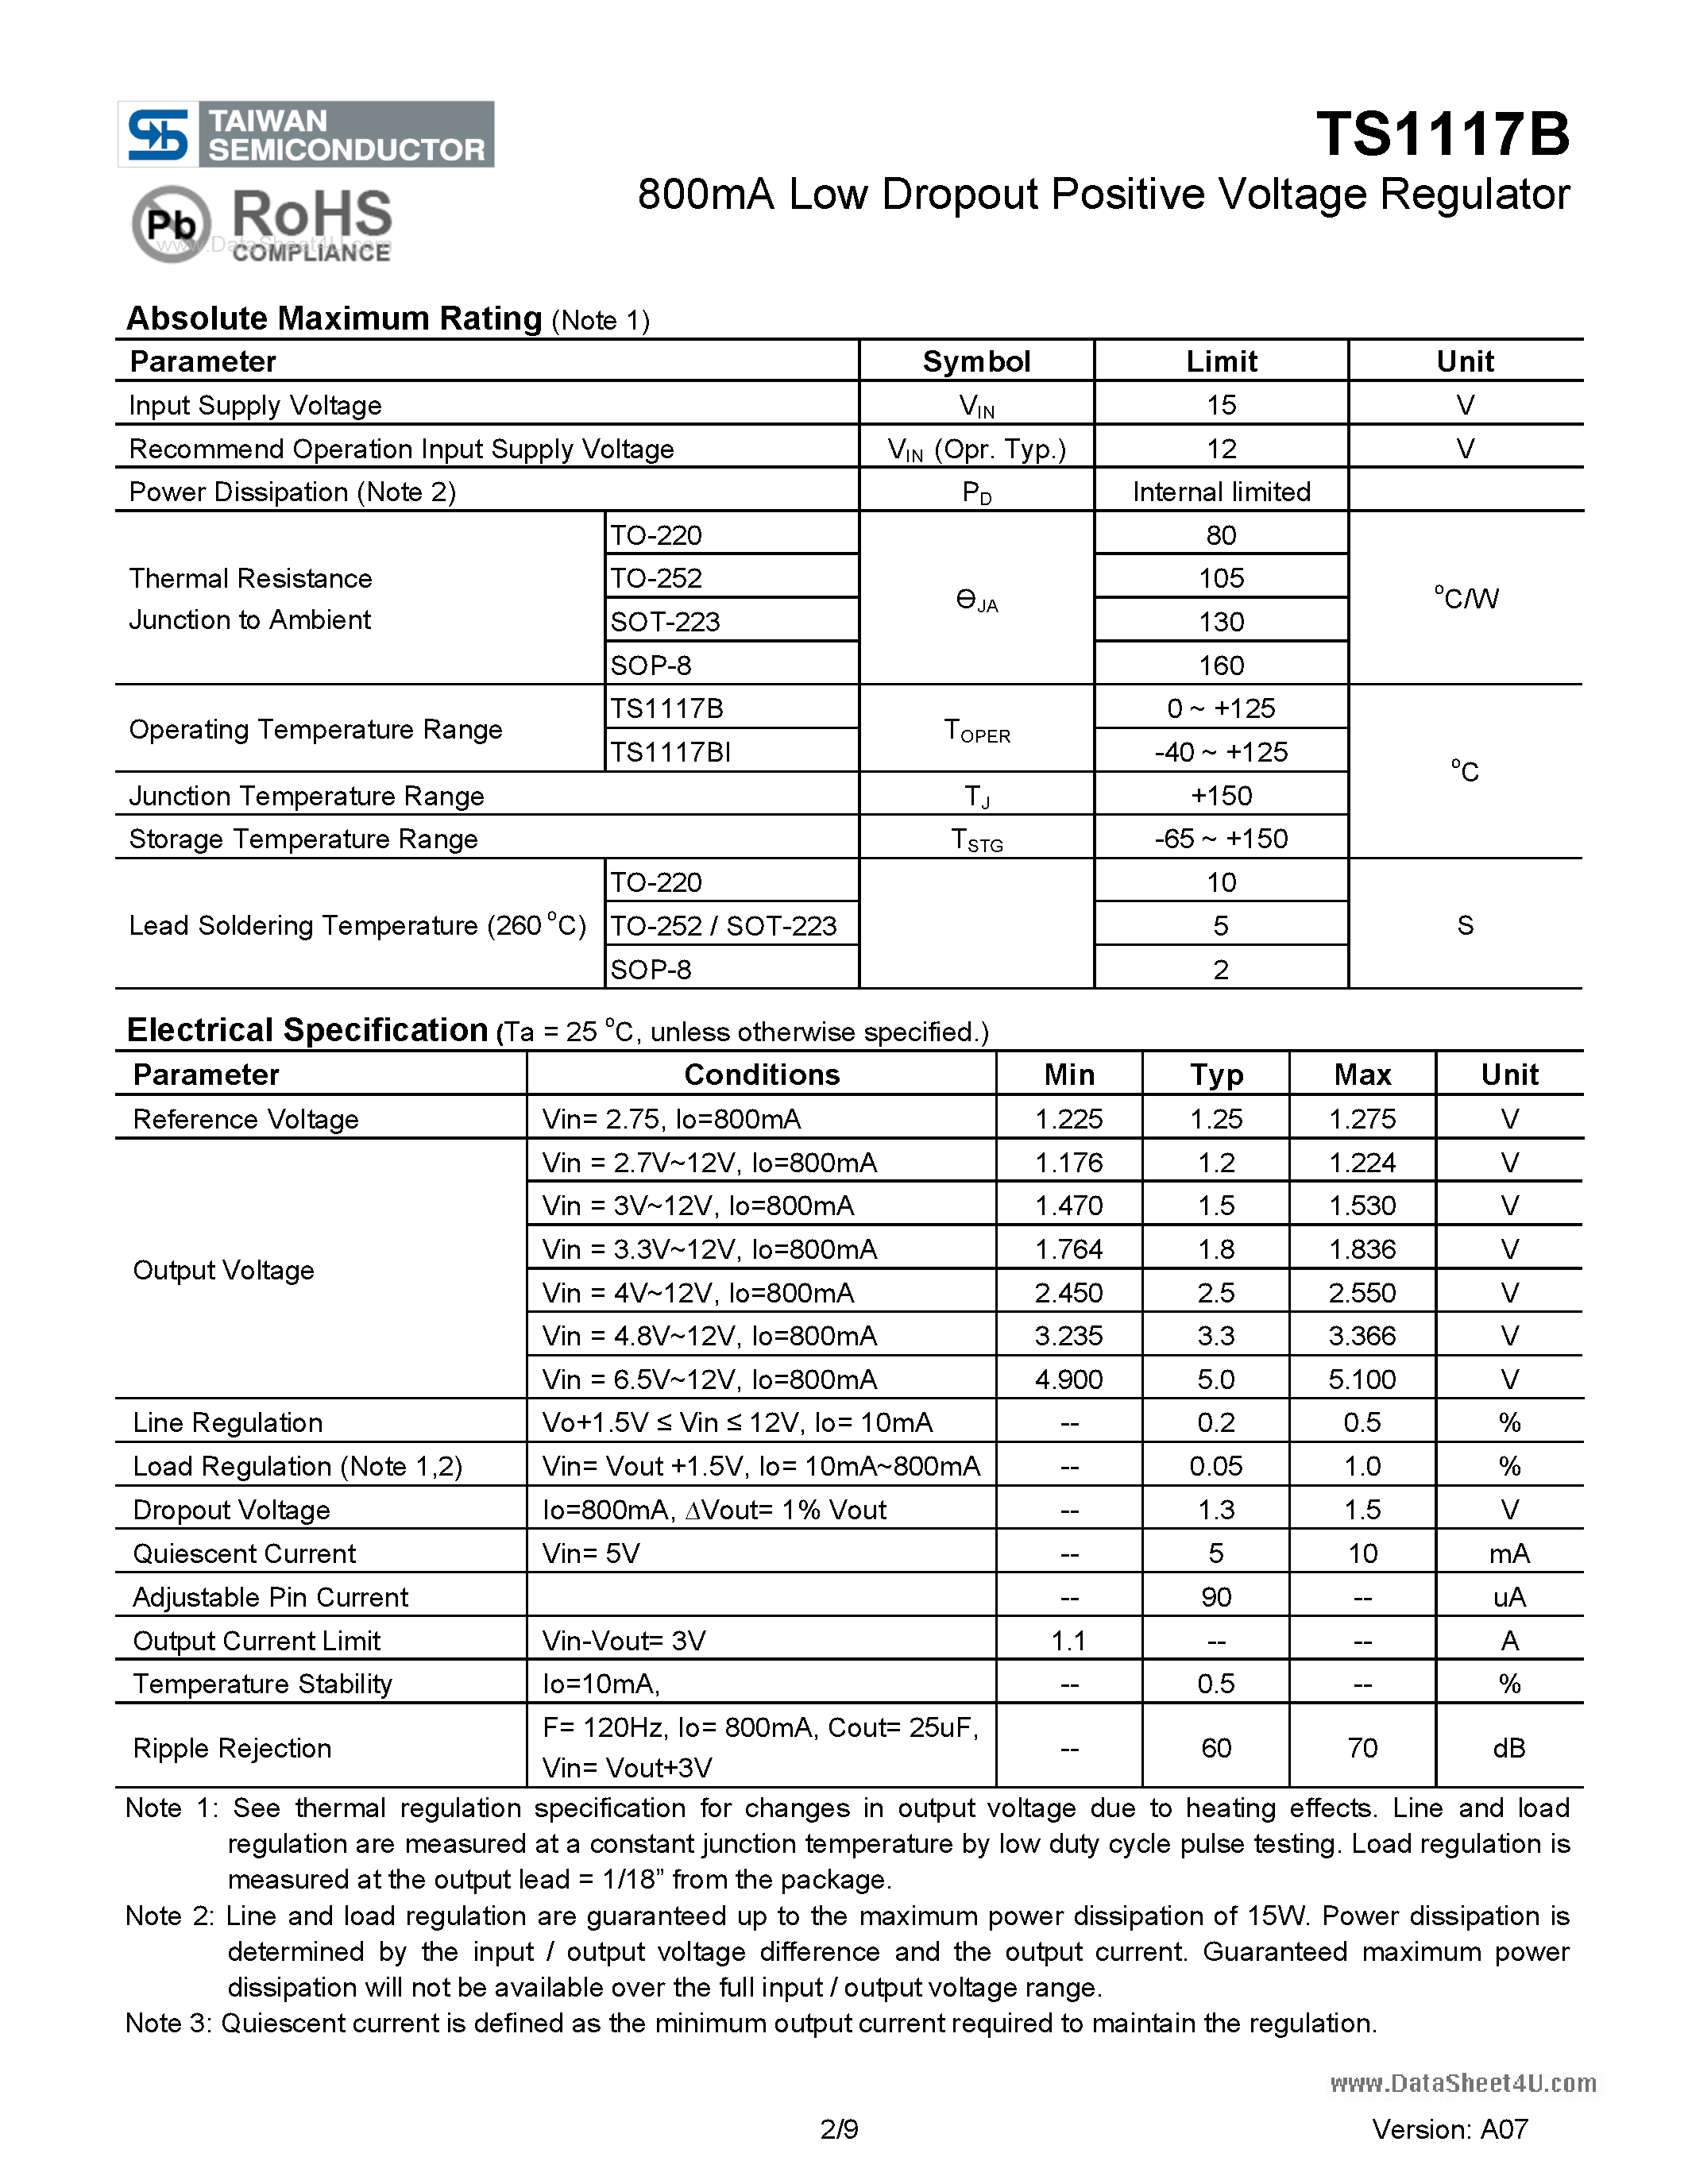 Datasheet TS1117B - 800mA Low Dropout Positive Voltage Regulator page 2